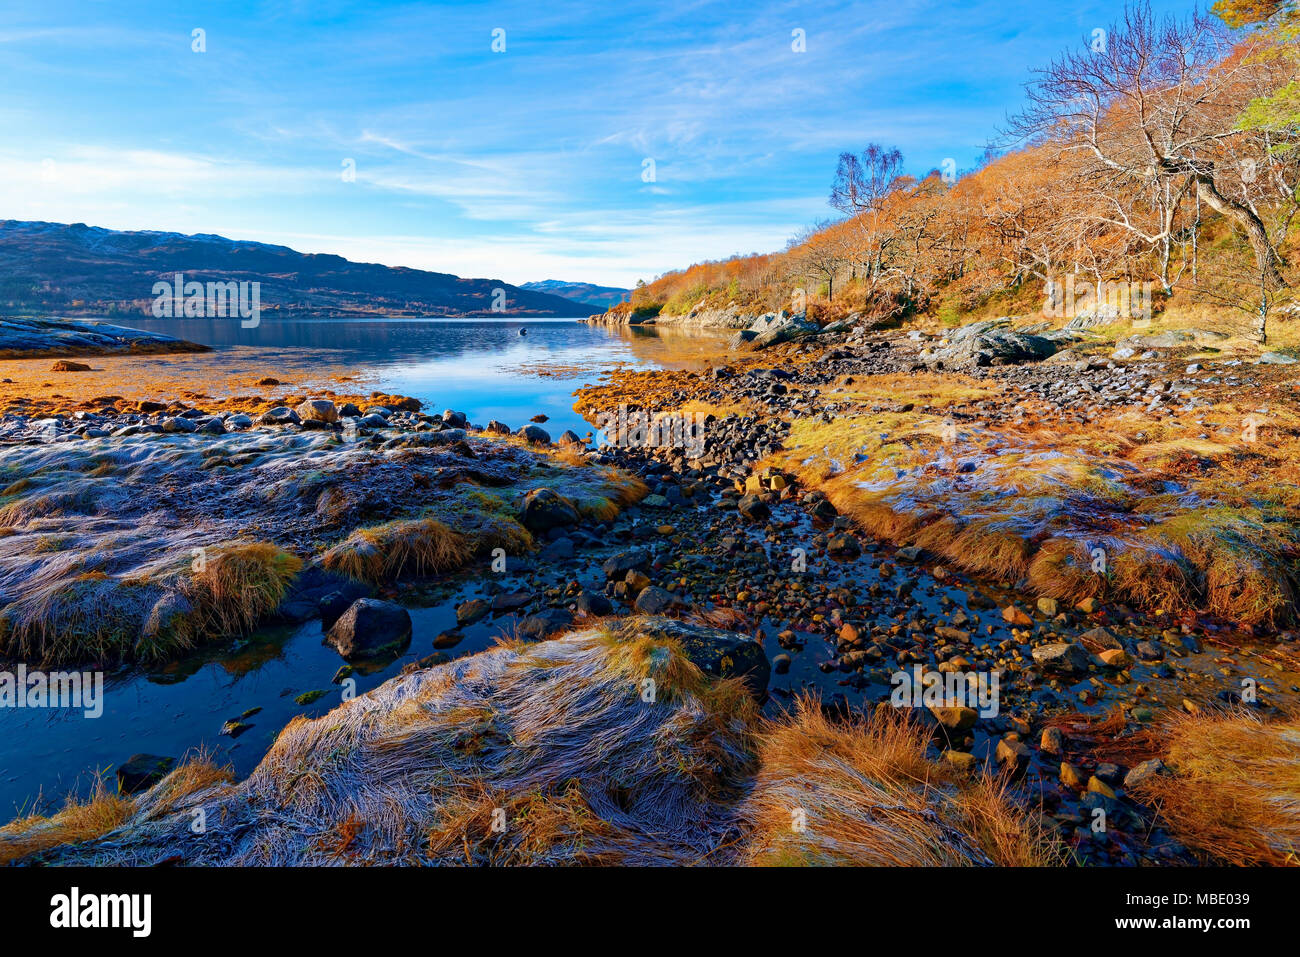 A sunny, autumn view of Loch Sunart in the Scottish Highlands as the first signs of winter appear. Stock Photo